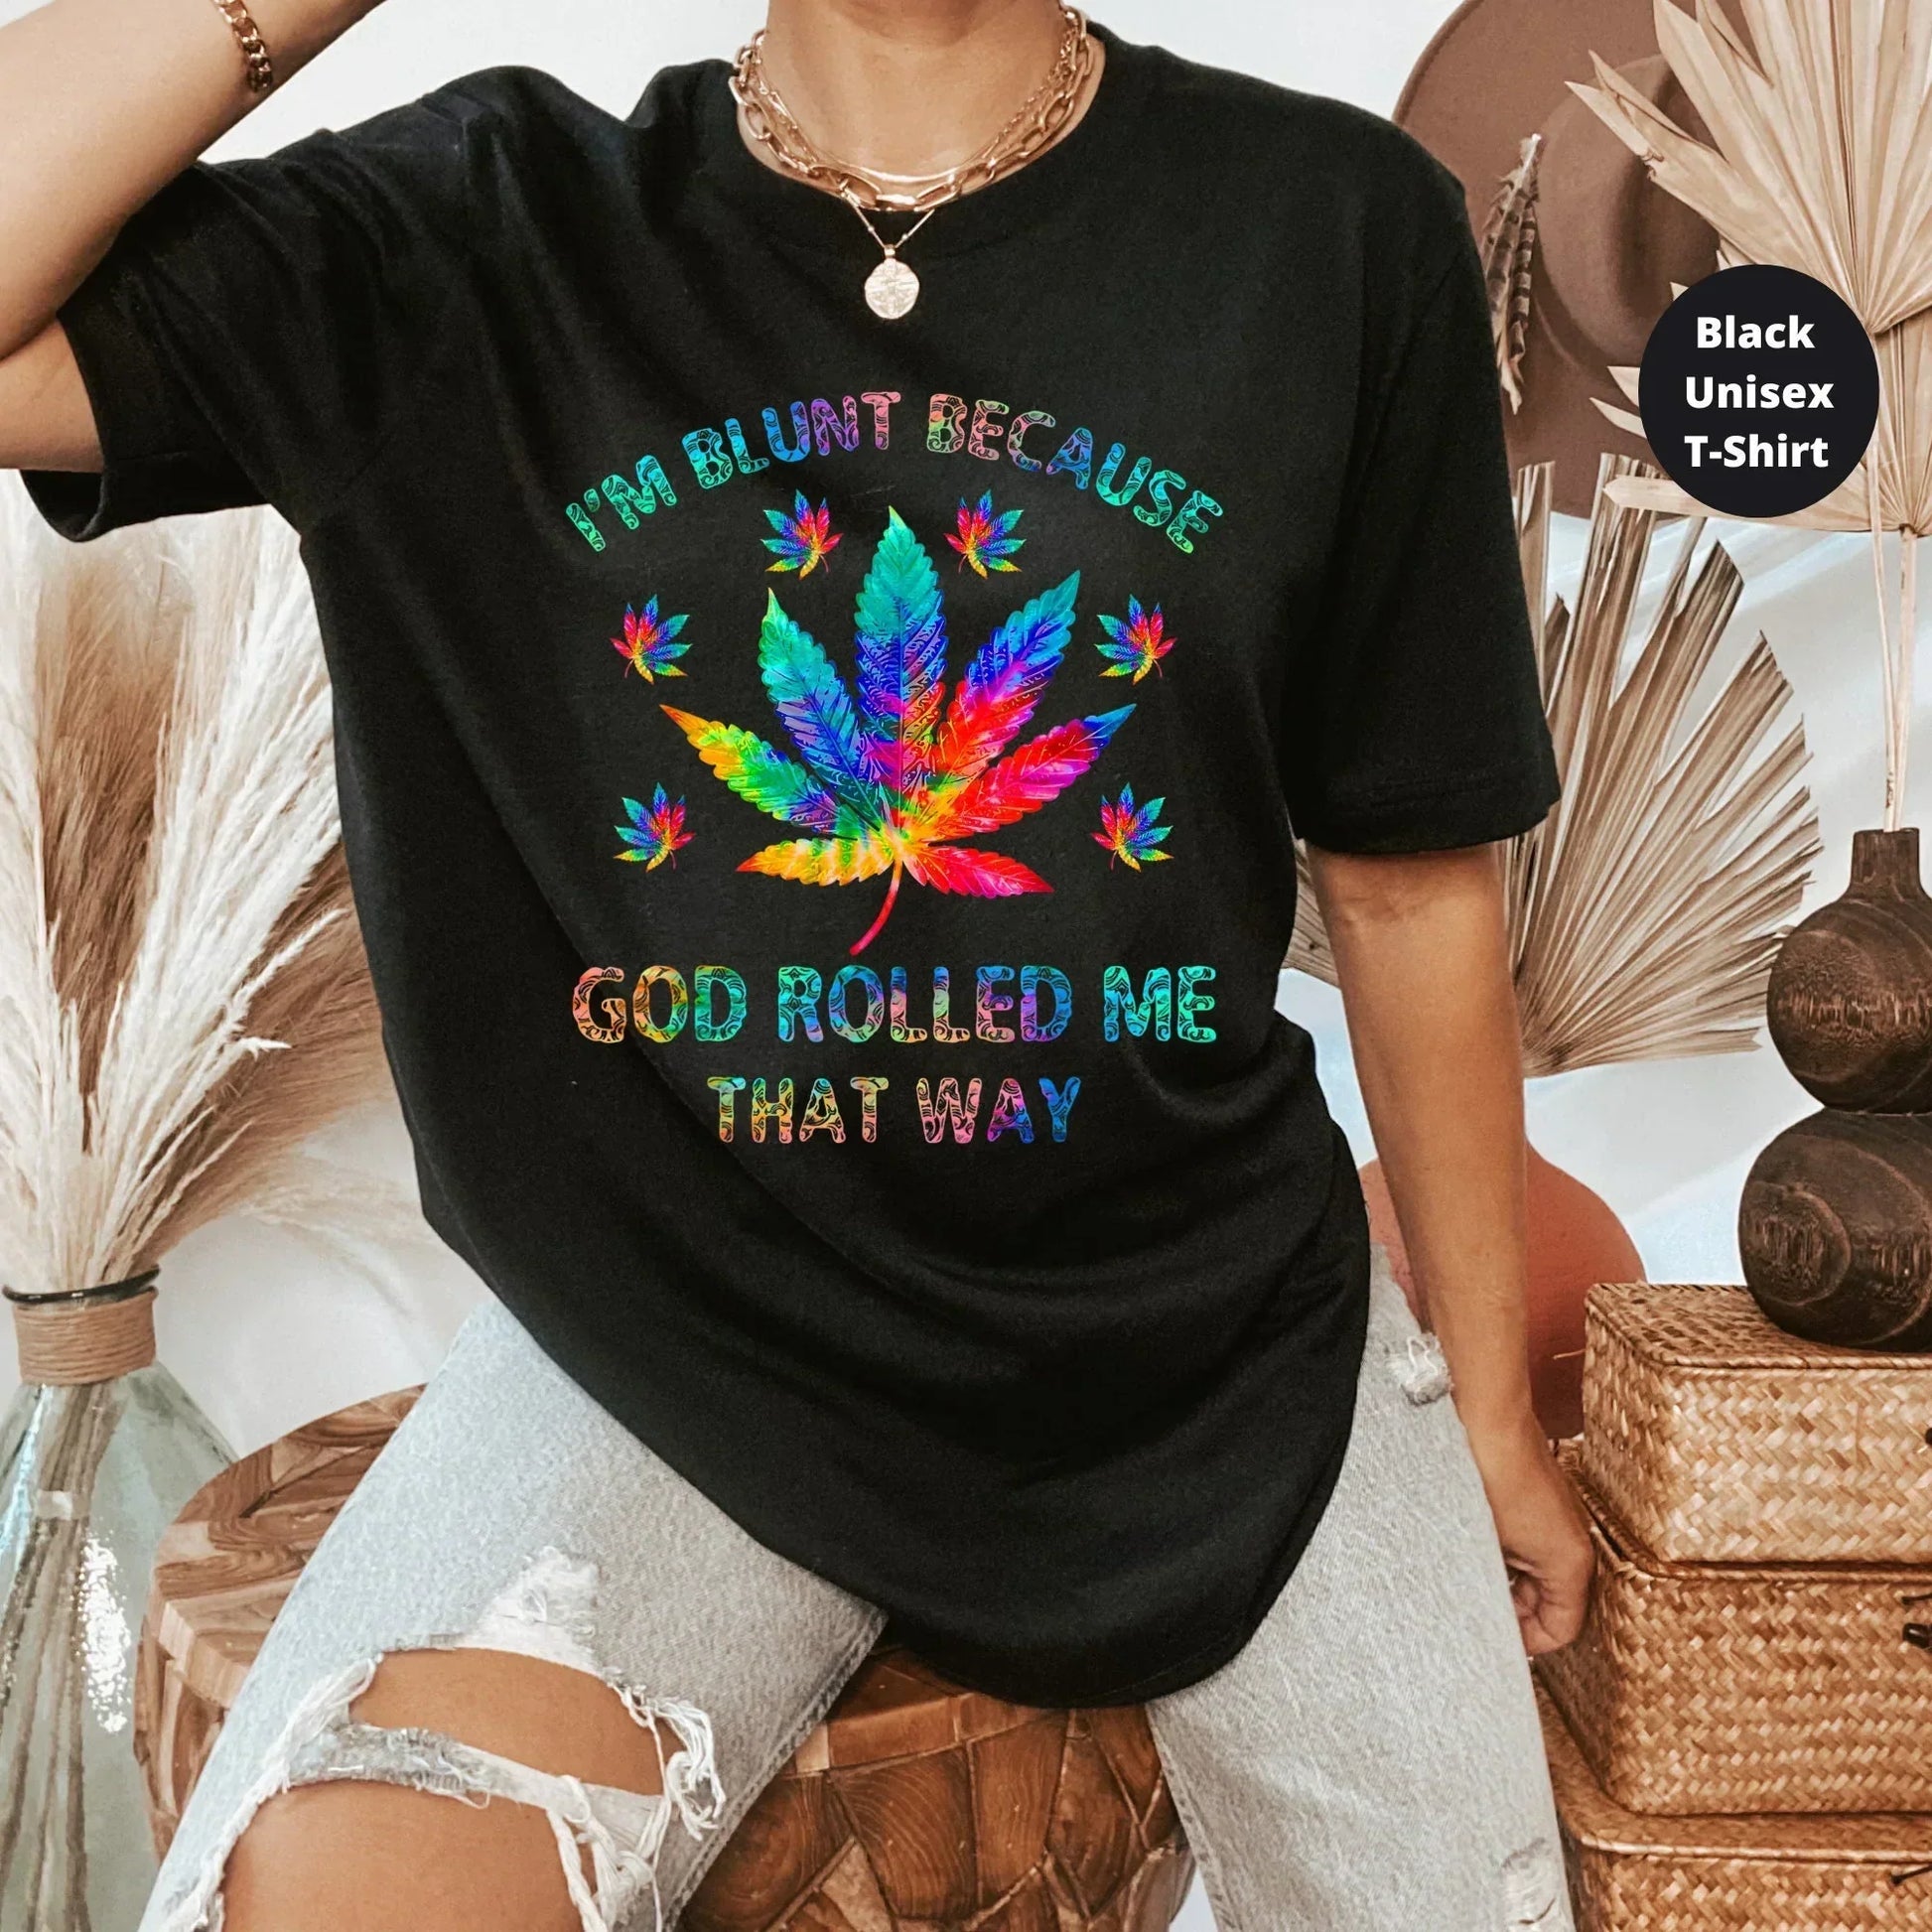 Stoner Gifts, Hippie Clothes, Weed Gifts, 420 Gift Bluntness Stoner Girl Shirt, Stoner Gift for Him, Stoner Gift for Her, Marijuana T shirts HMDesignStudioUS